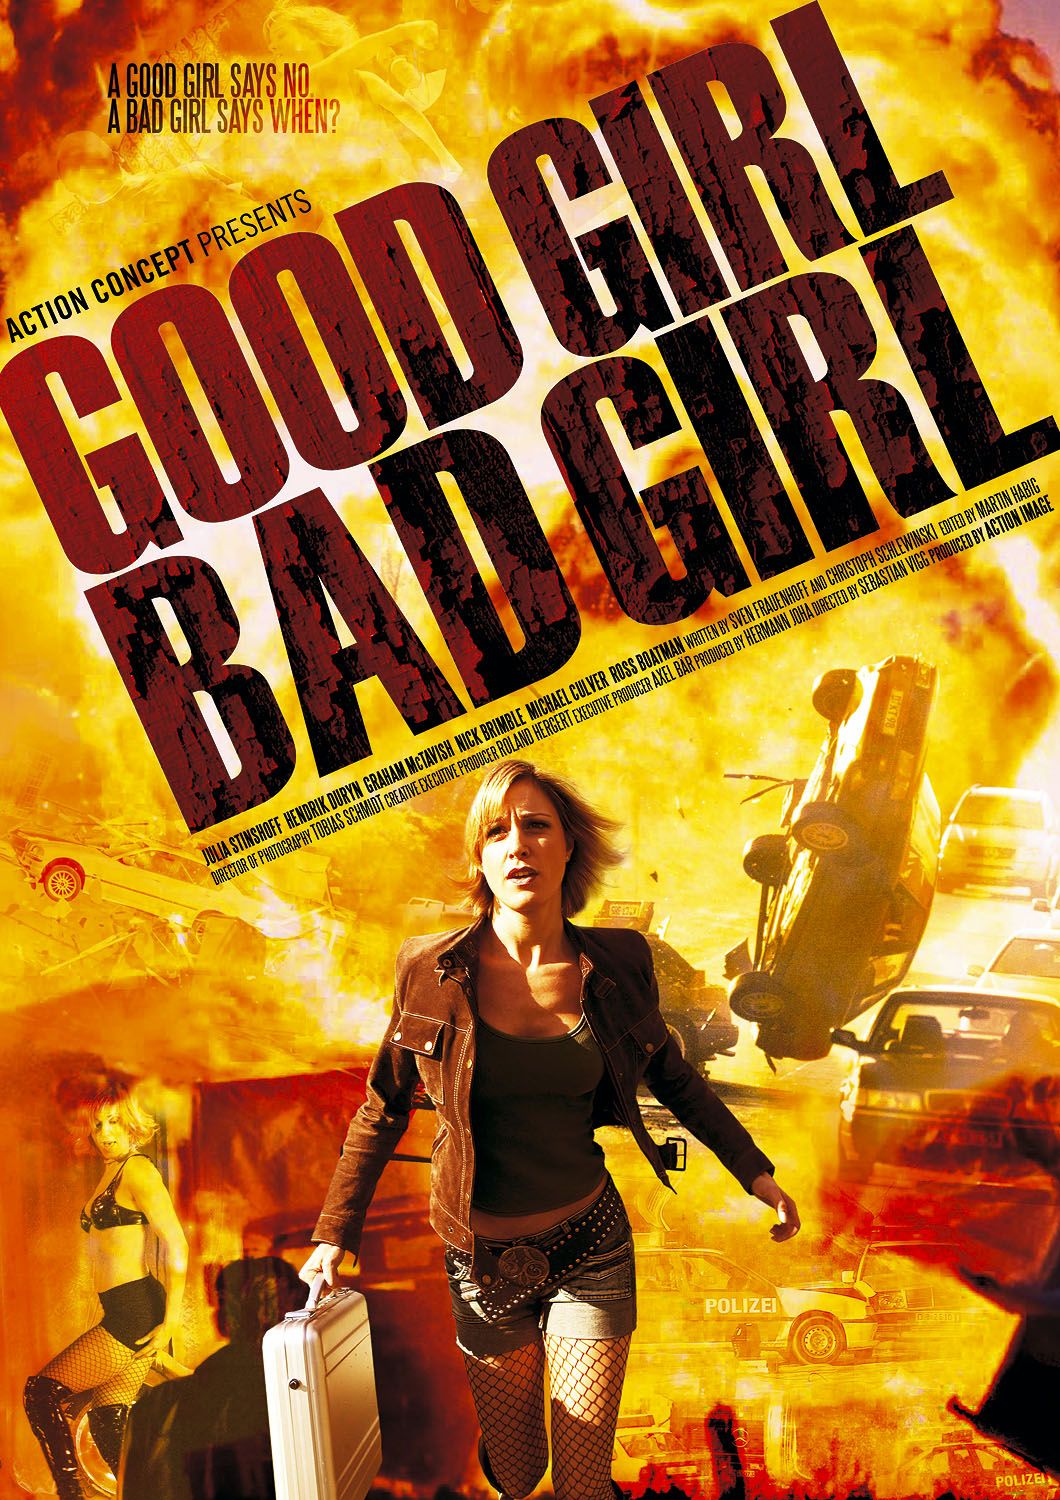 Extra Large TV Poster Image for Good Girl, Bad Girl 